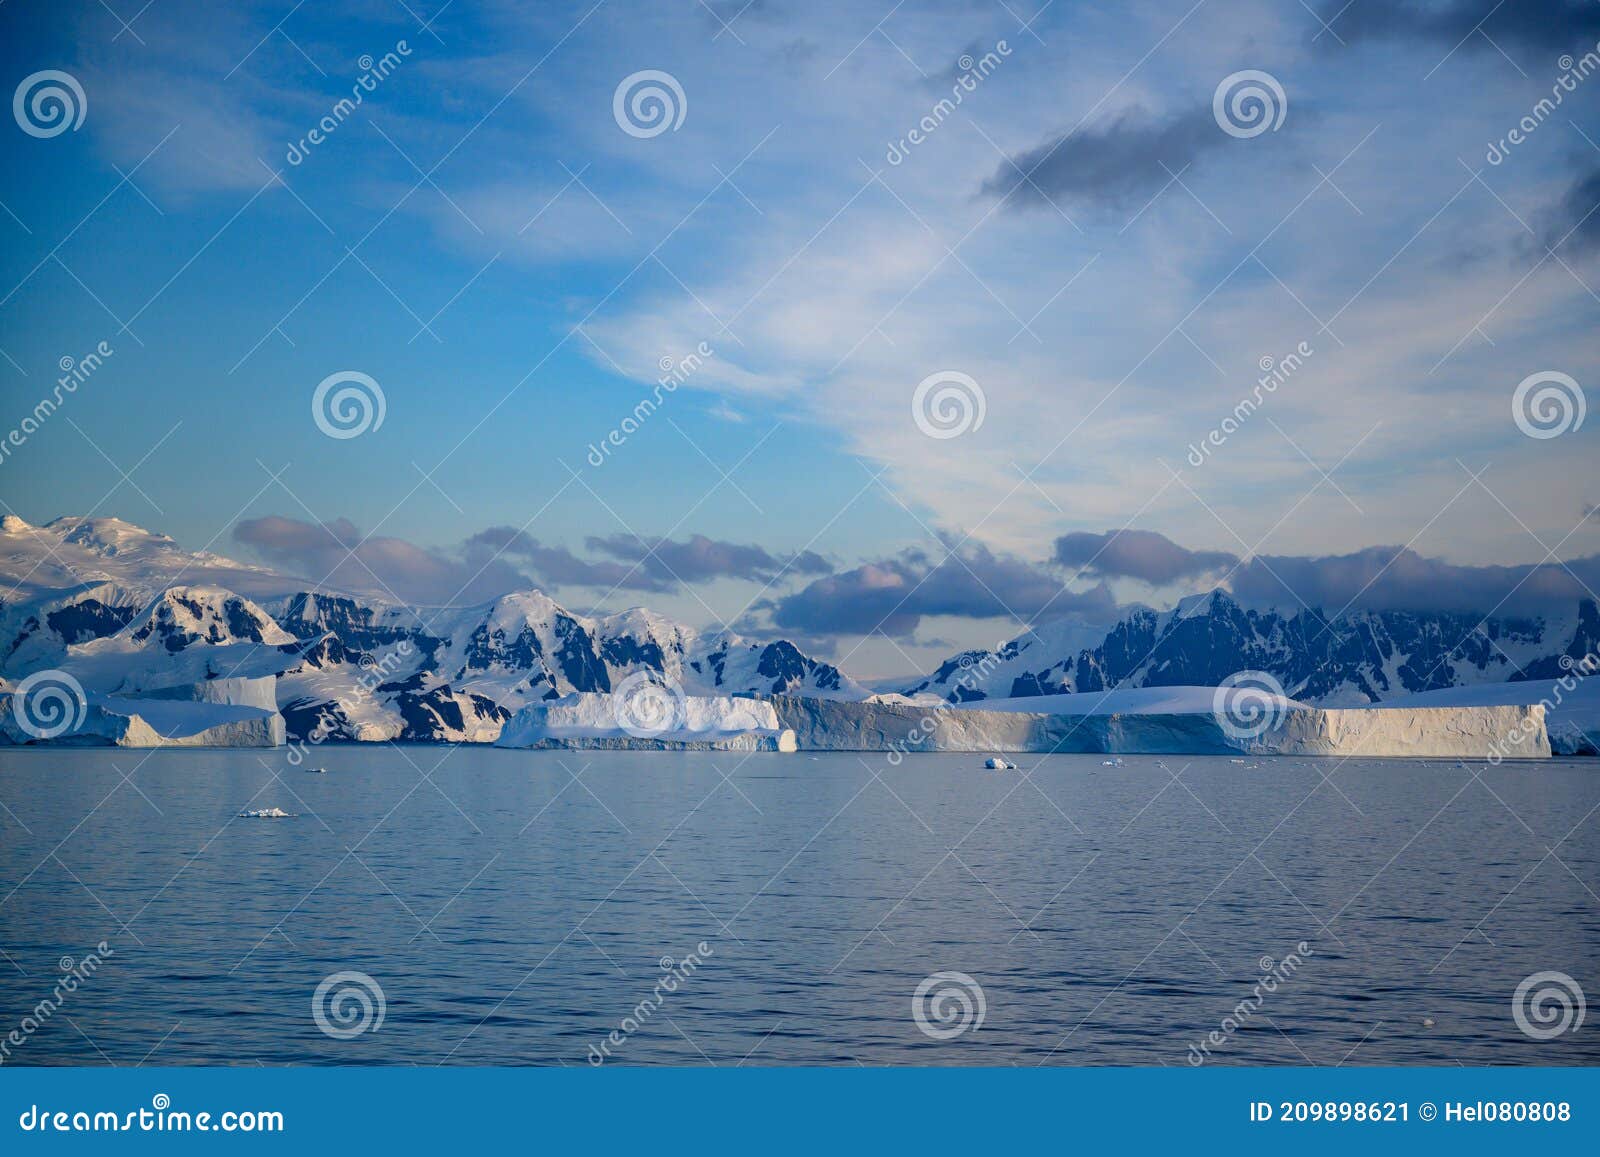 antarctic landscape with snowcapped mountains, icebergs and glacier near andvor bay, antactic peninsular